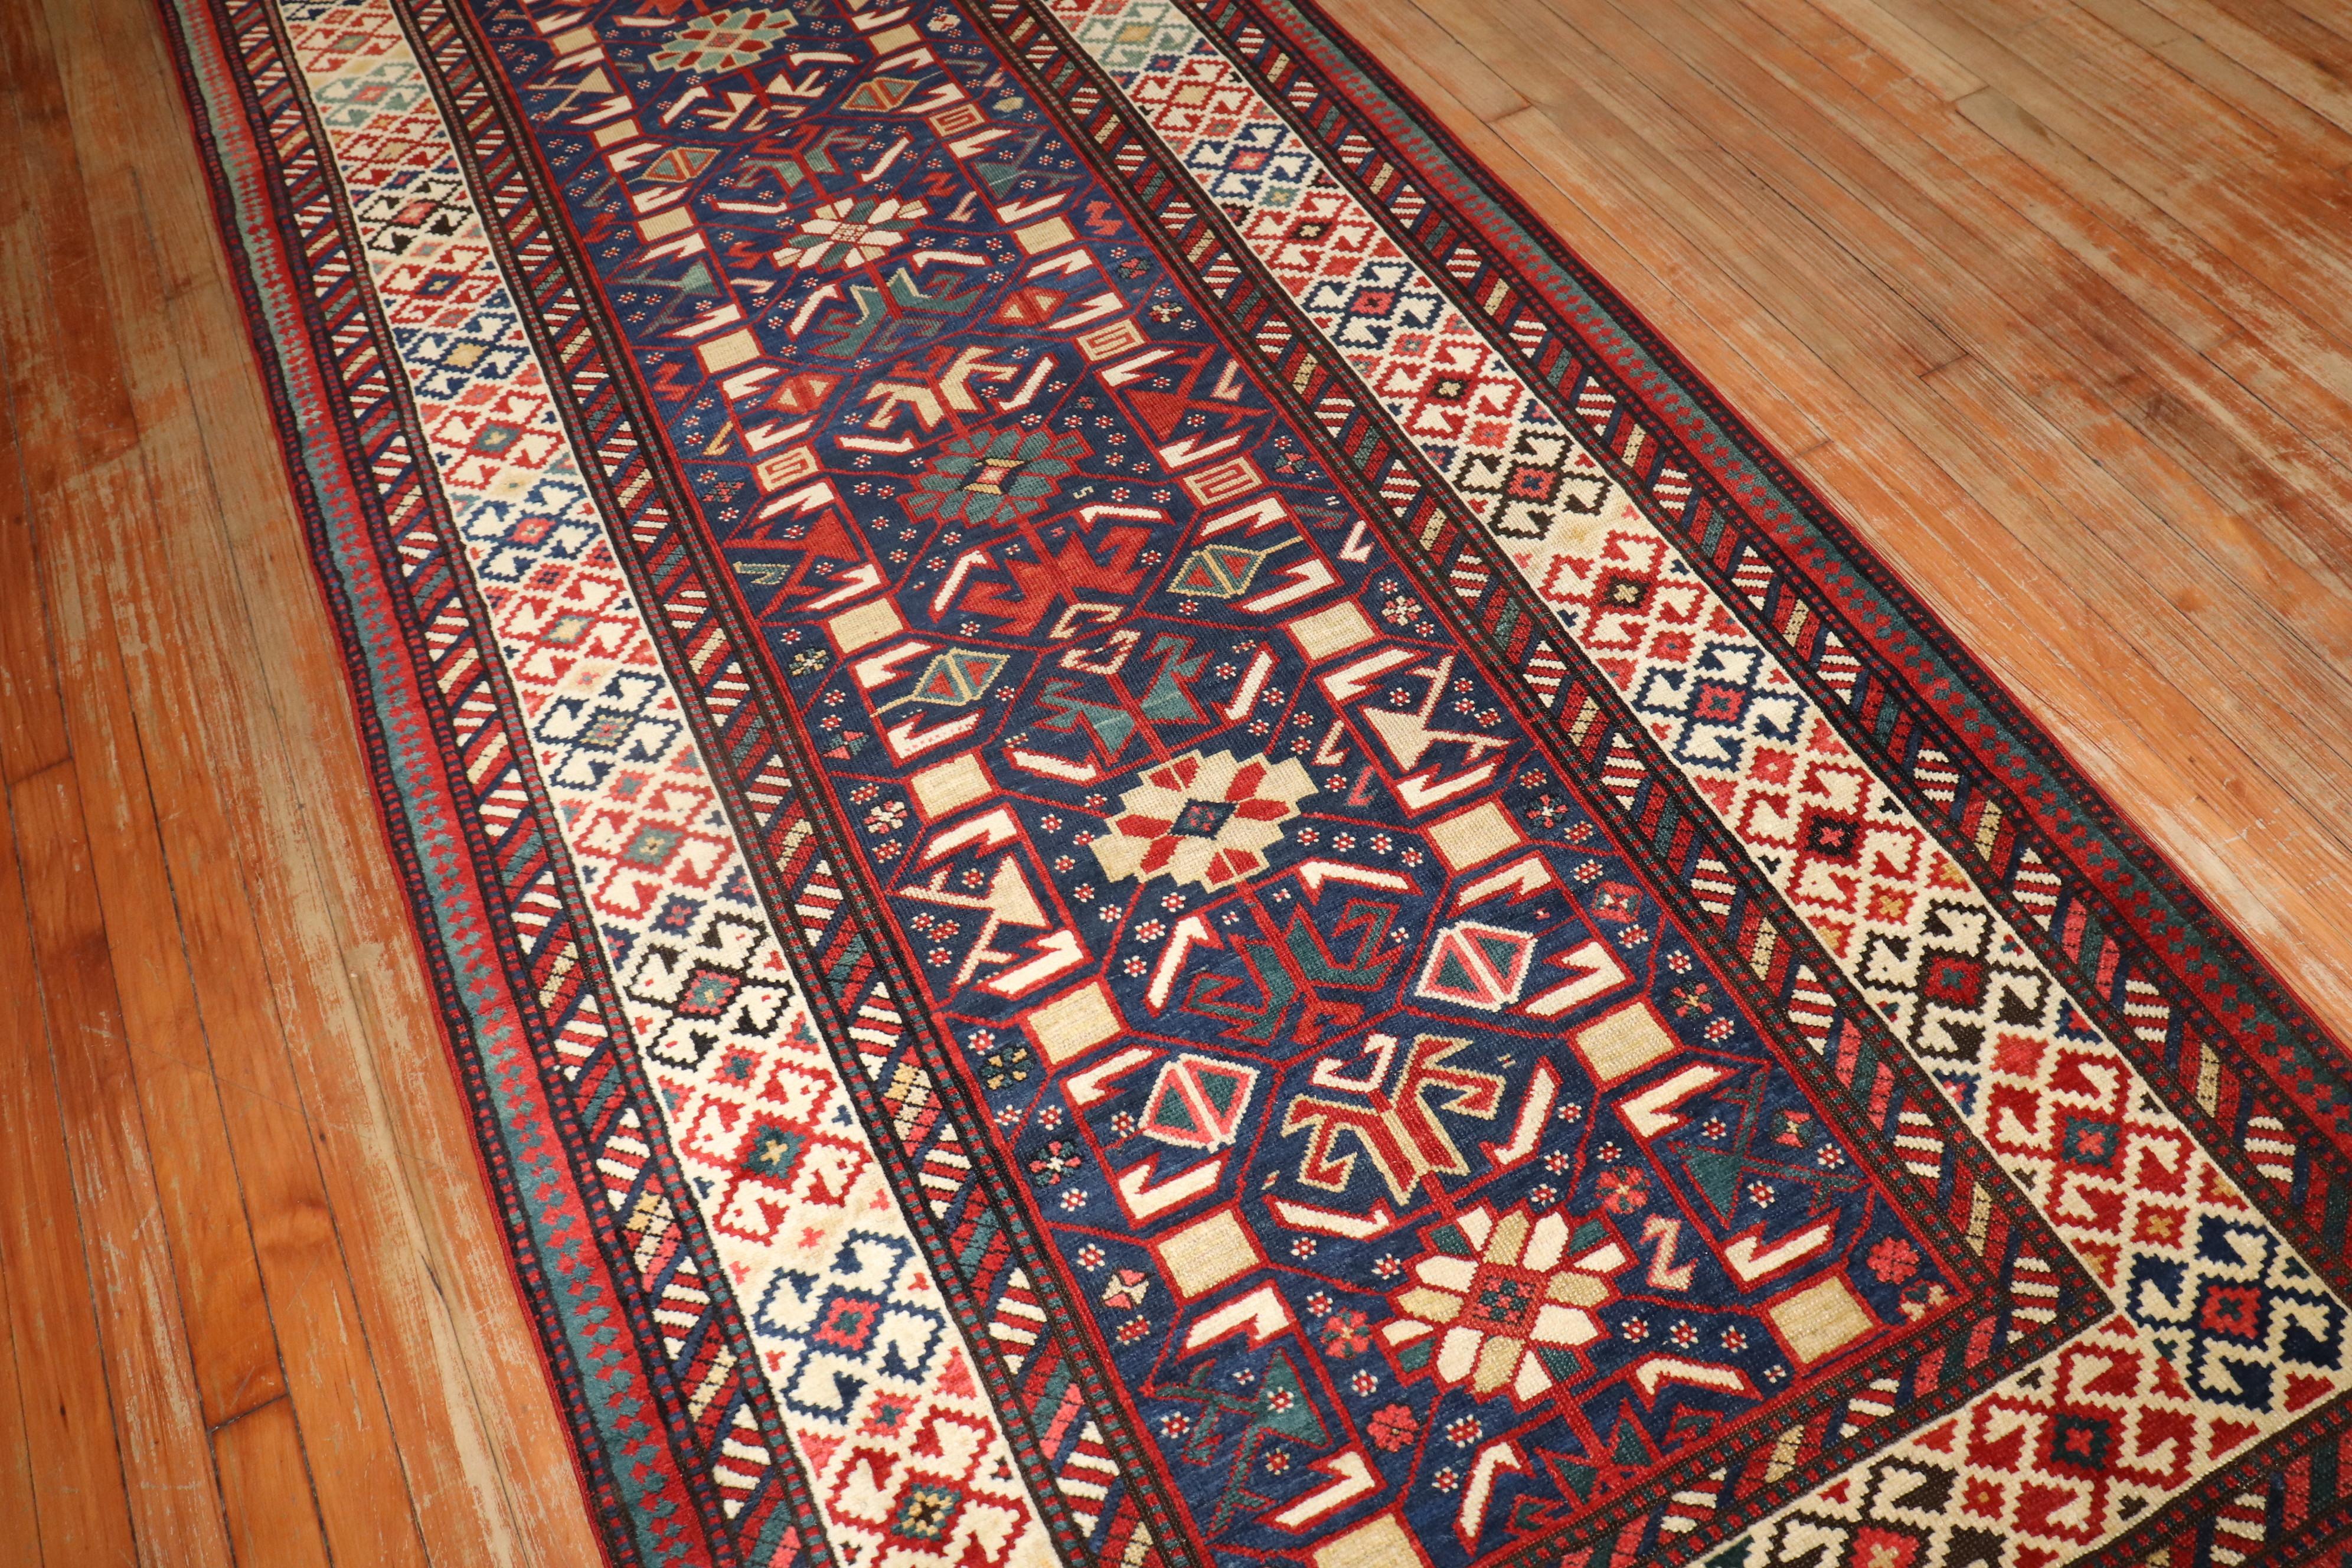 19th century kuba shirvan antique runner  with a tribal pattern  on a navy color field

Measures: 3'11'' x 12'1''.